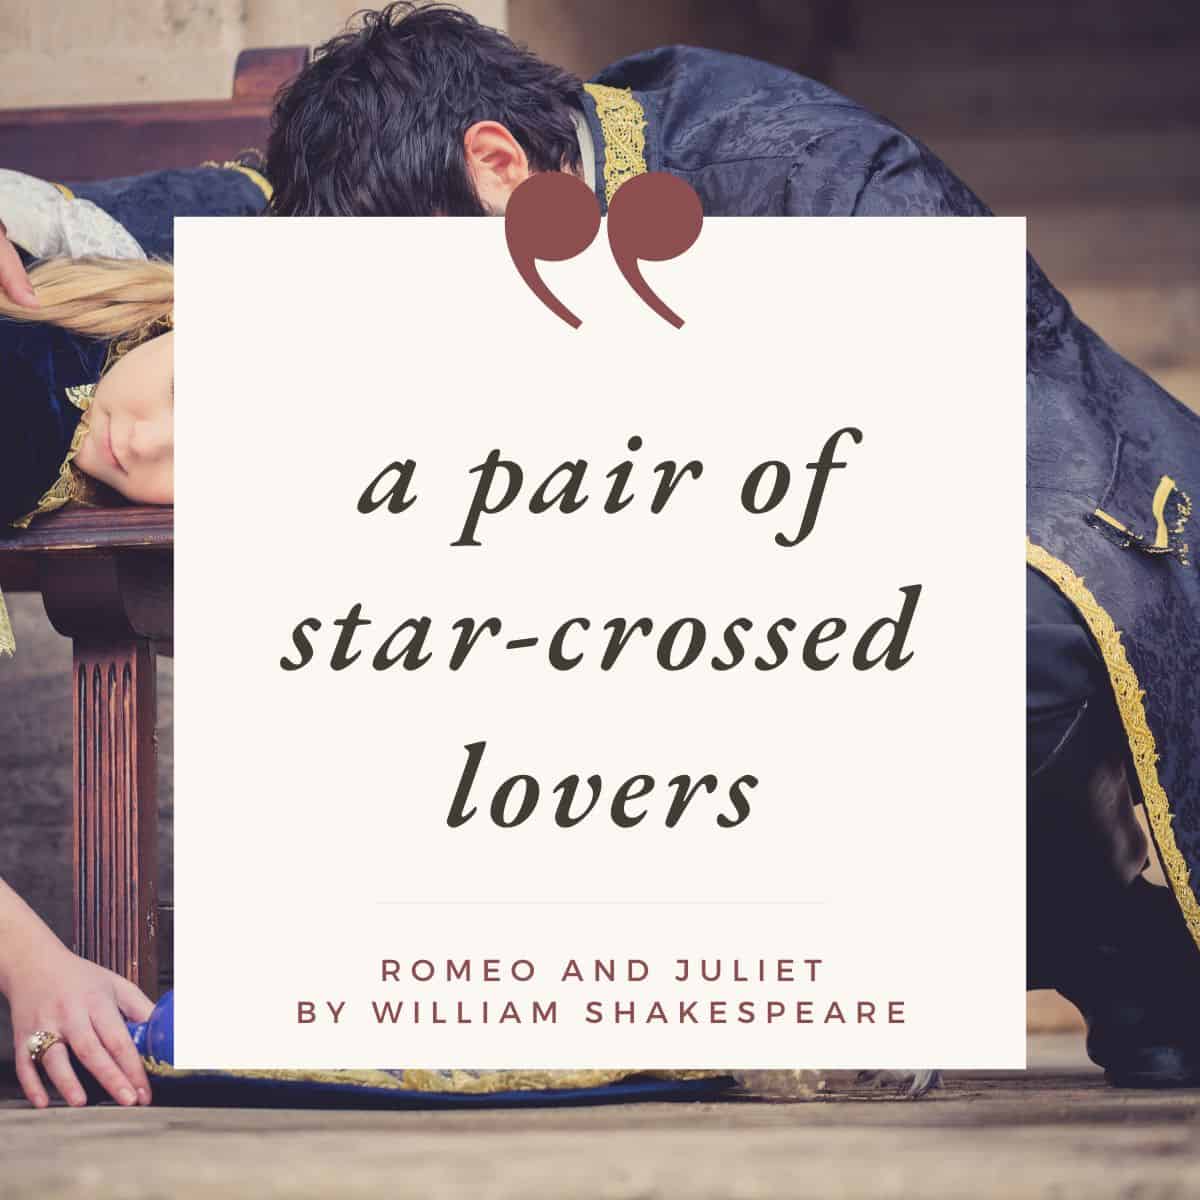 50 Best Romeo & Juliet Quotes on Fate, Love & Conflict